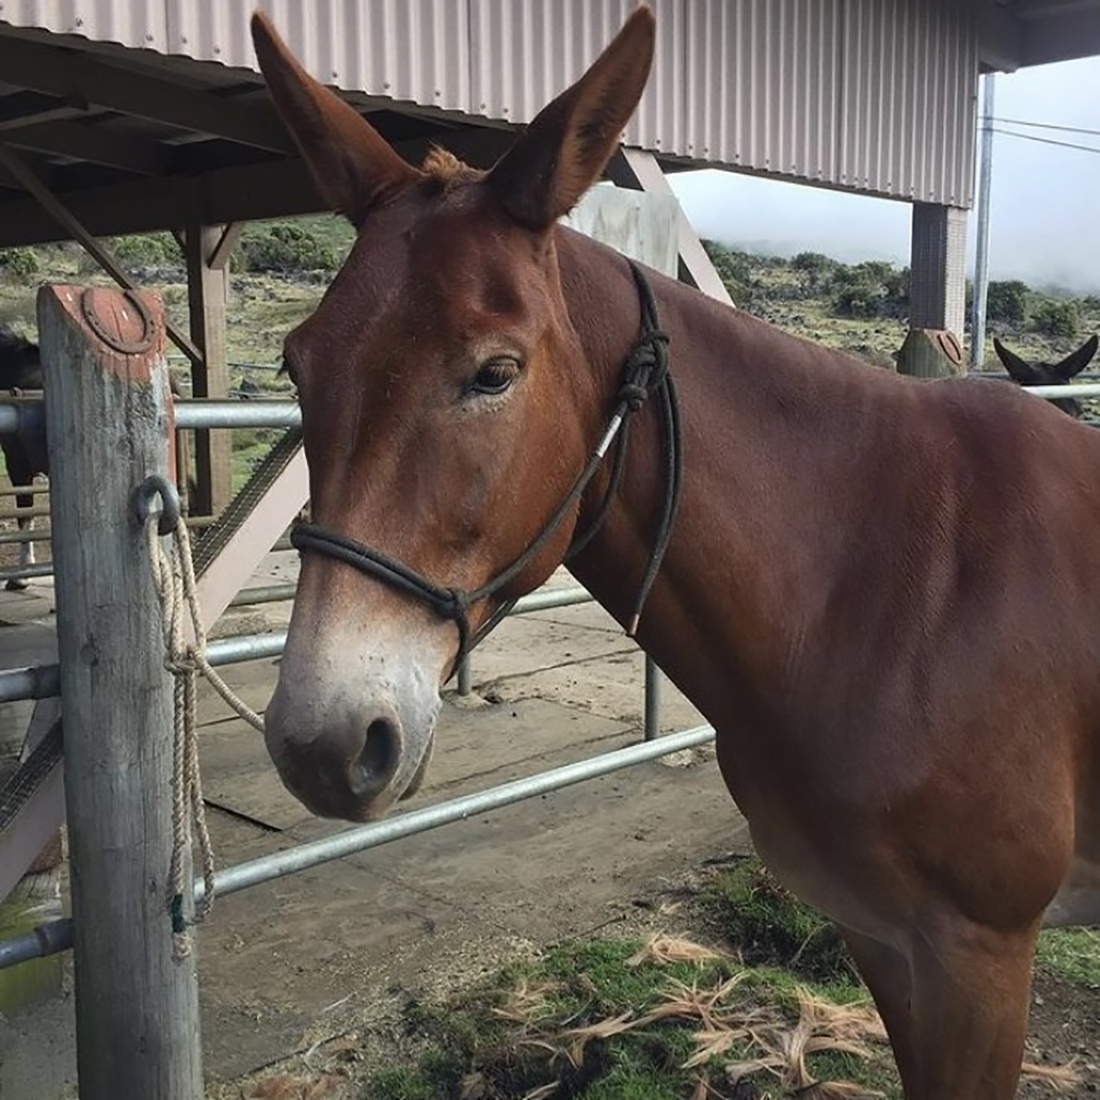 Rusty, a brown mule with a shiny clean coat, faces the camera.